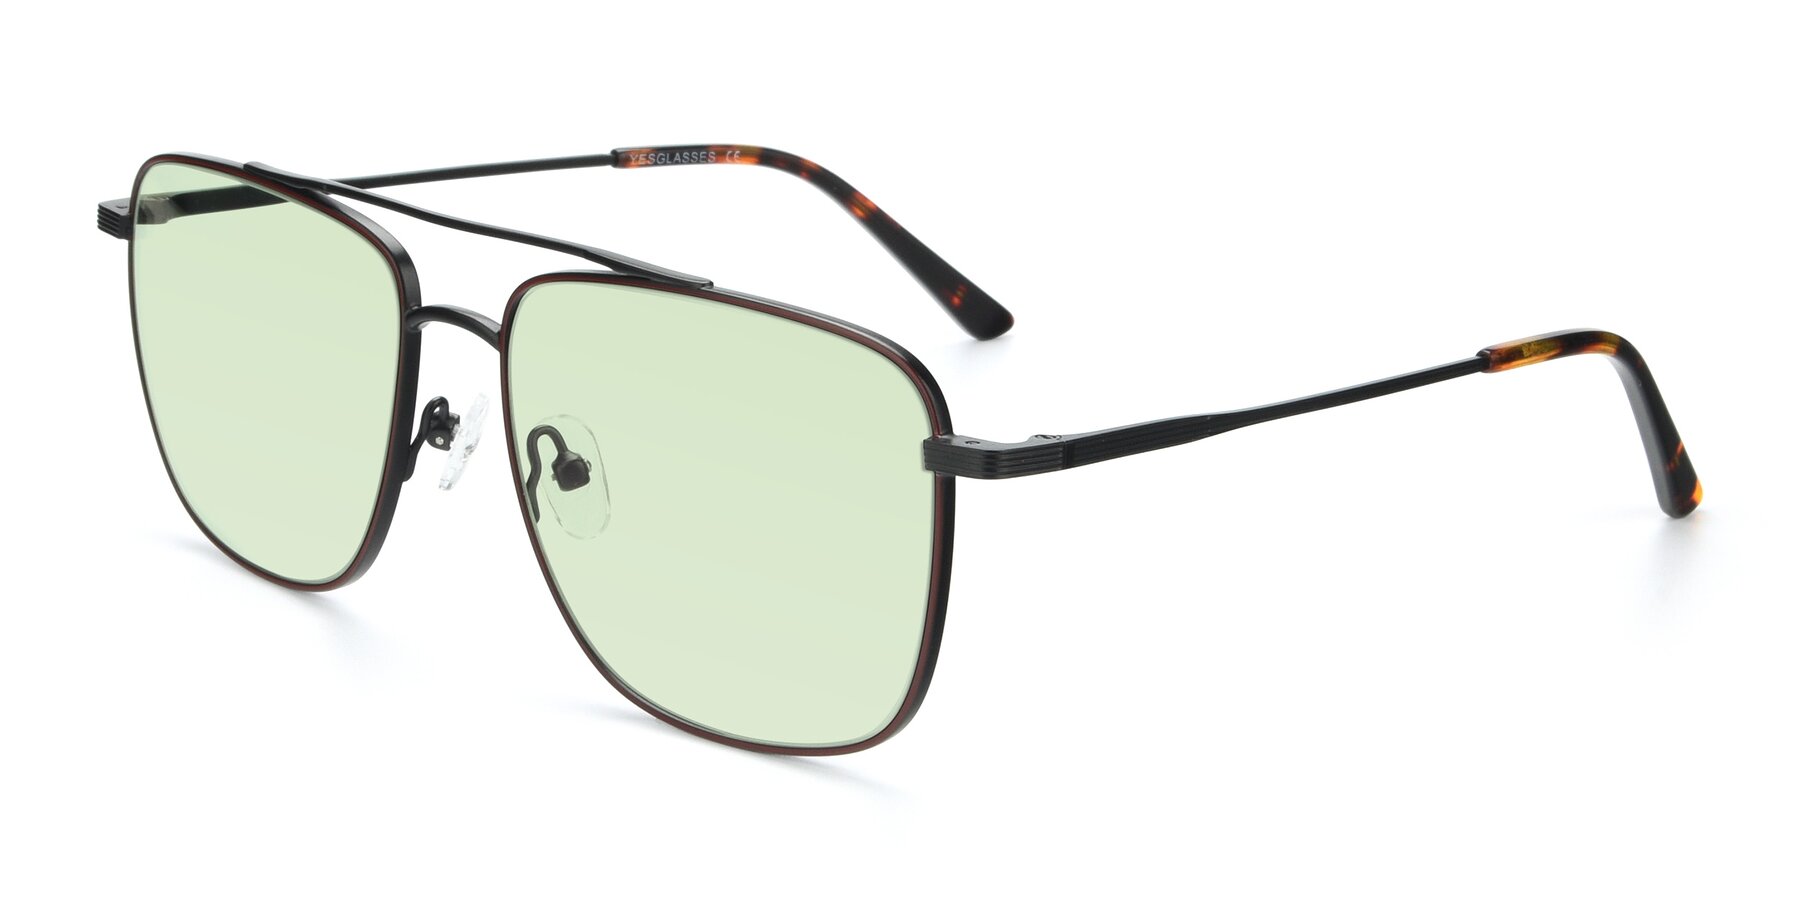 Angle of 9519 in Brown-Black with Light Green Tinted Lenses